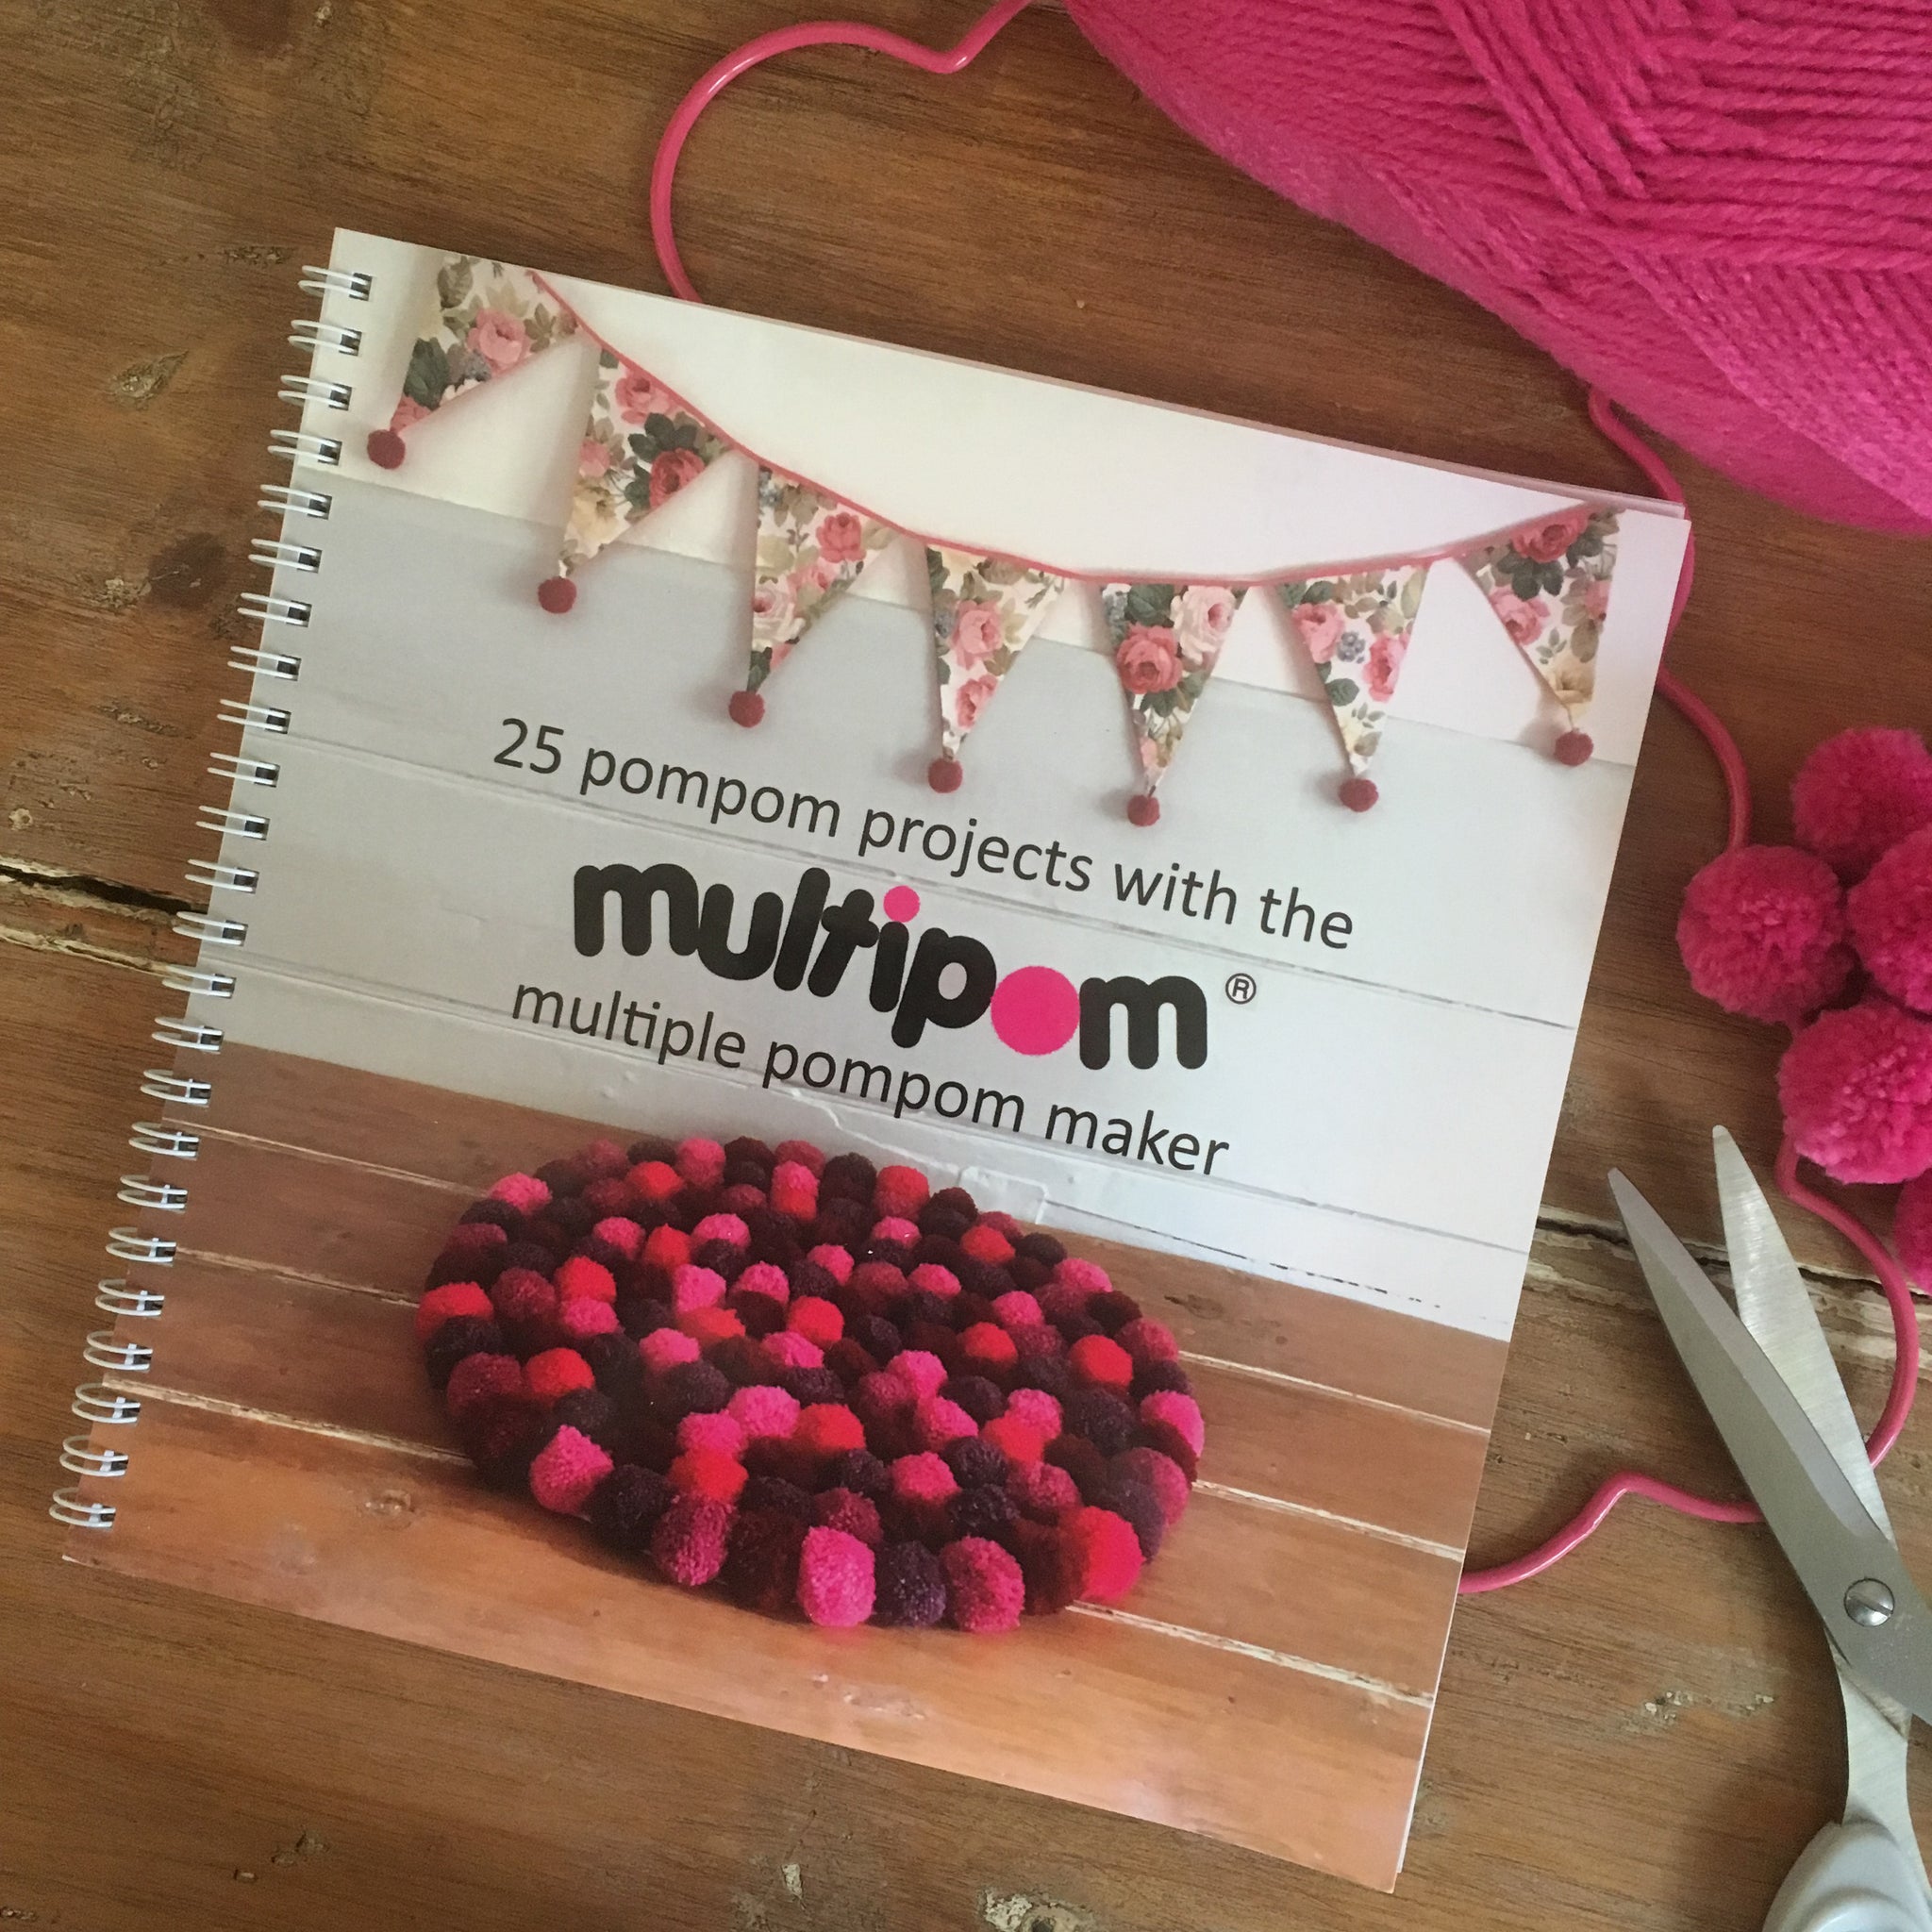 25 step-by-step projects with the Multipom